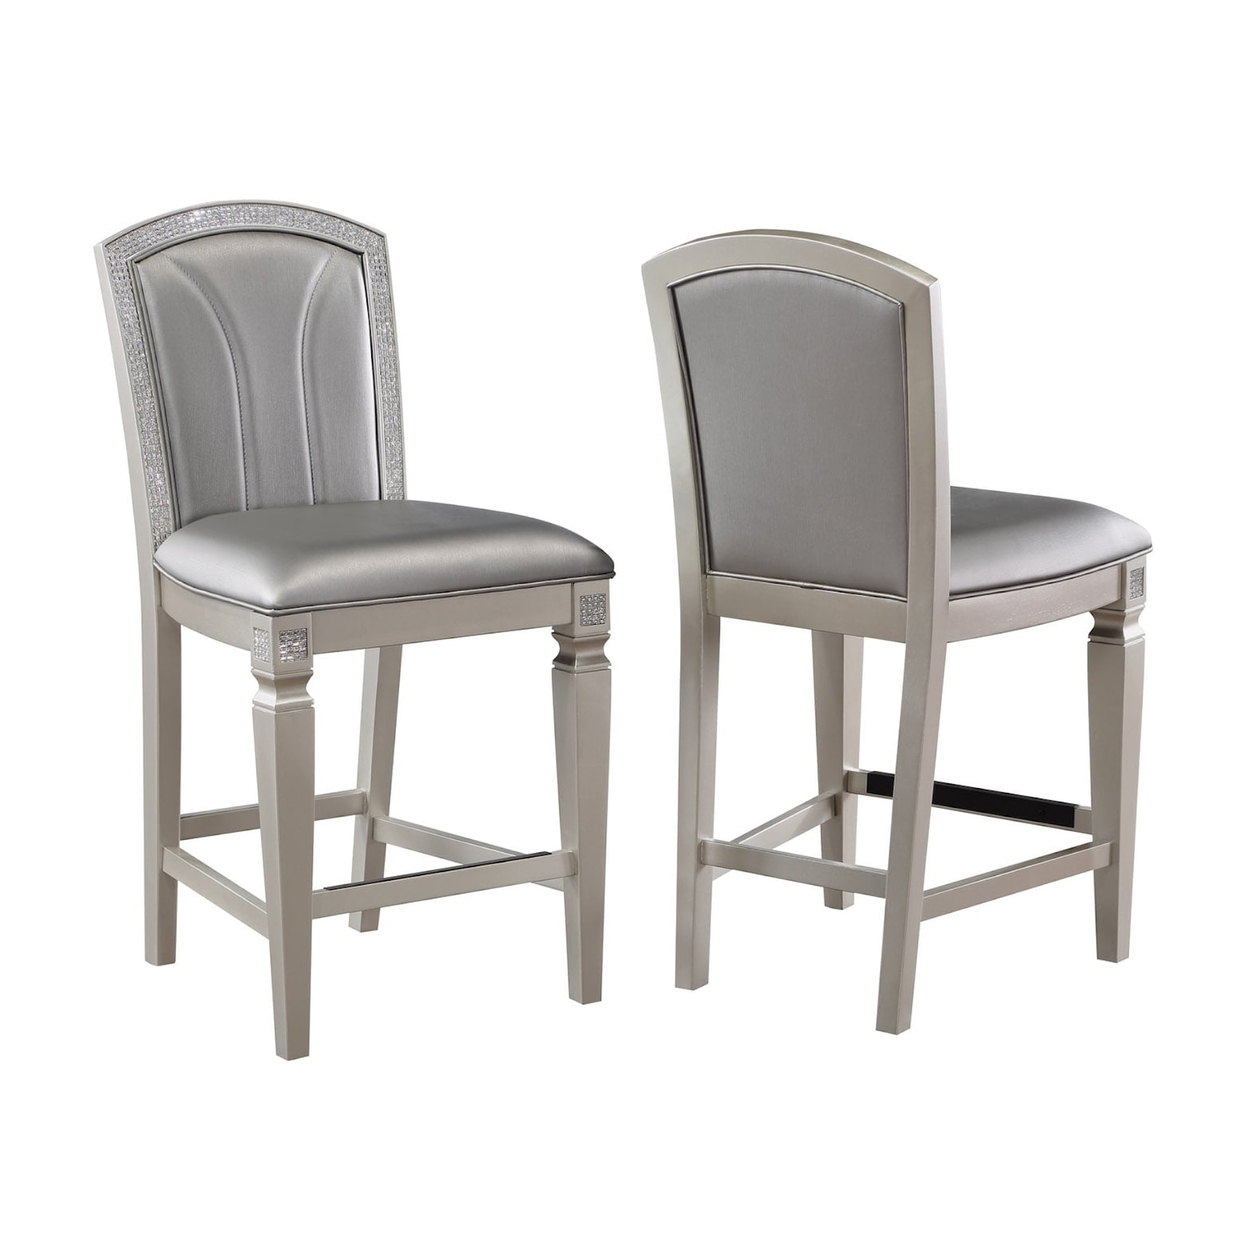 Scott 26 Inch Counter Height Chair Set Of 2, Wood Frame, Faux Leather, Gray -Saltoro Sherpi